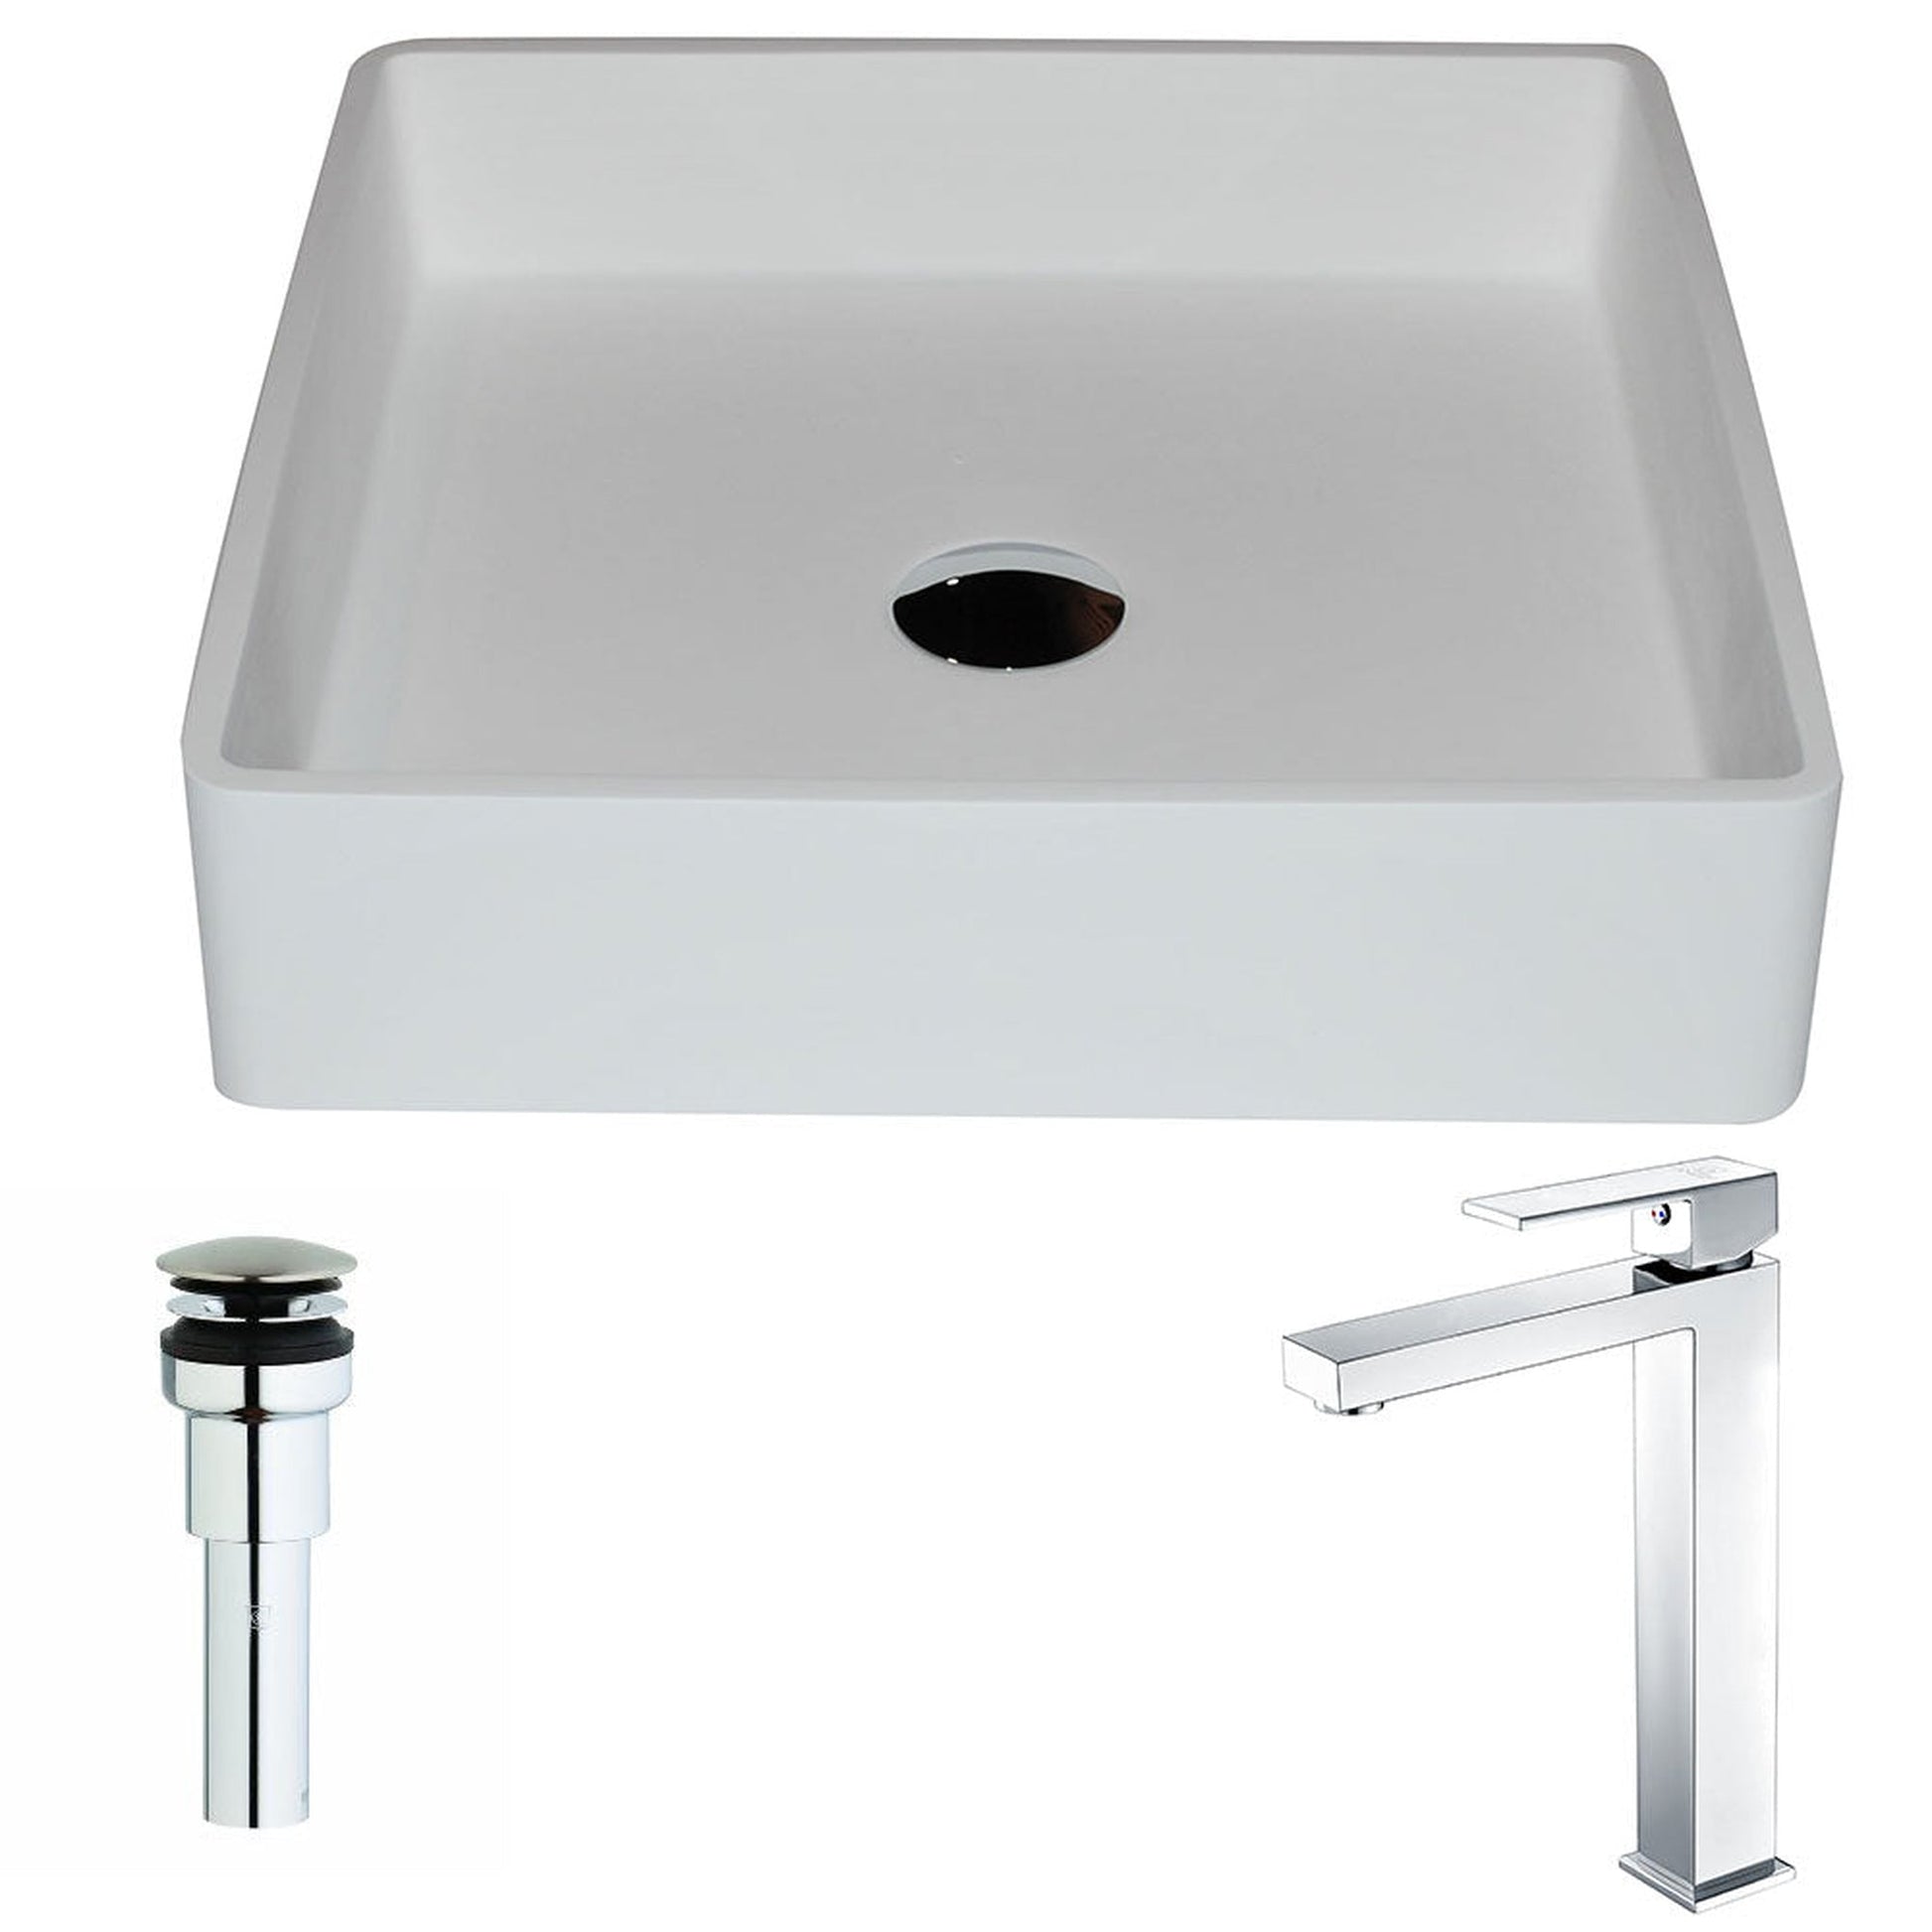 ANZZI Passage Series 16" x 16" Square Shape Matte White Vessel Sink With Polished Chrome Enti Vessel Faucet and Pop-up Drain